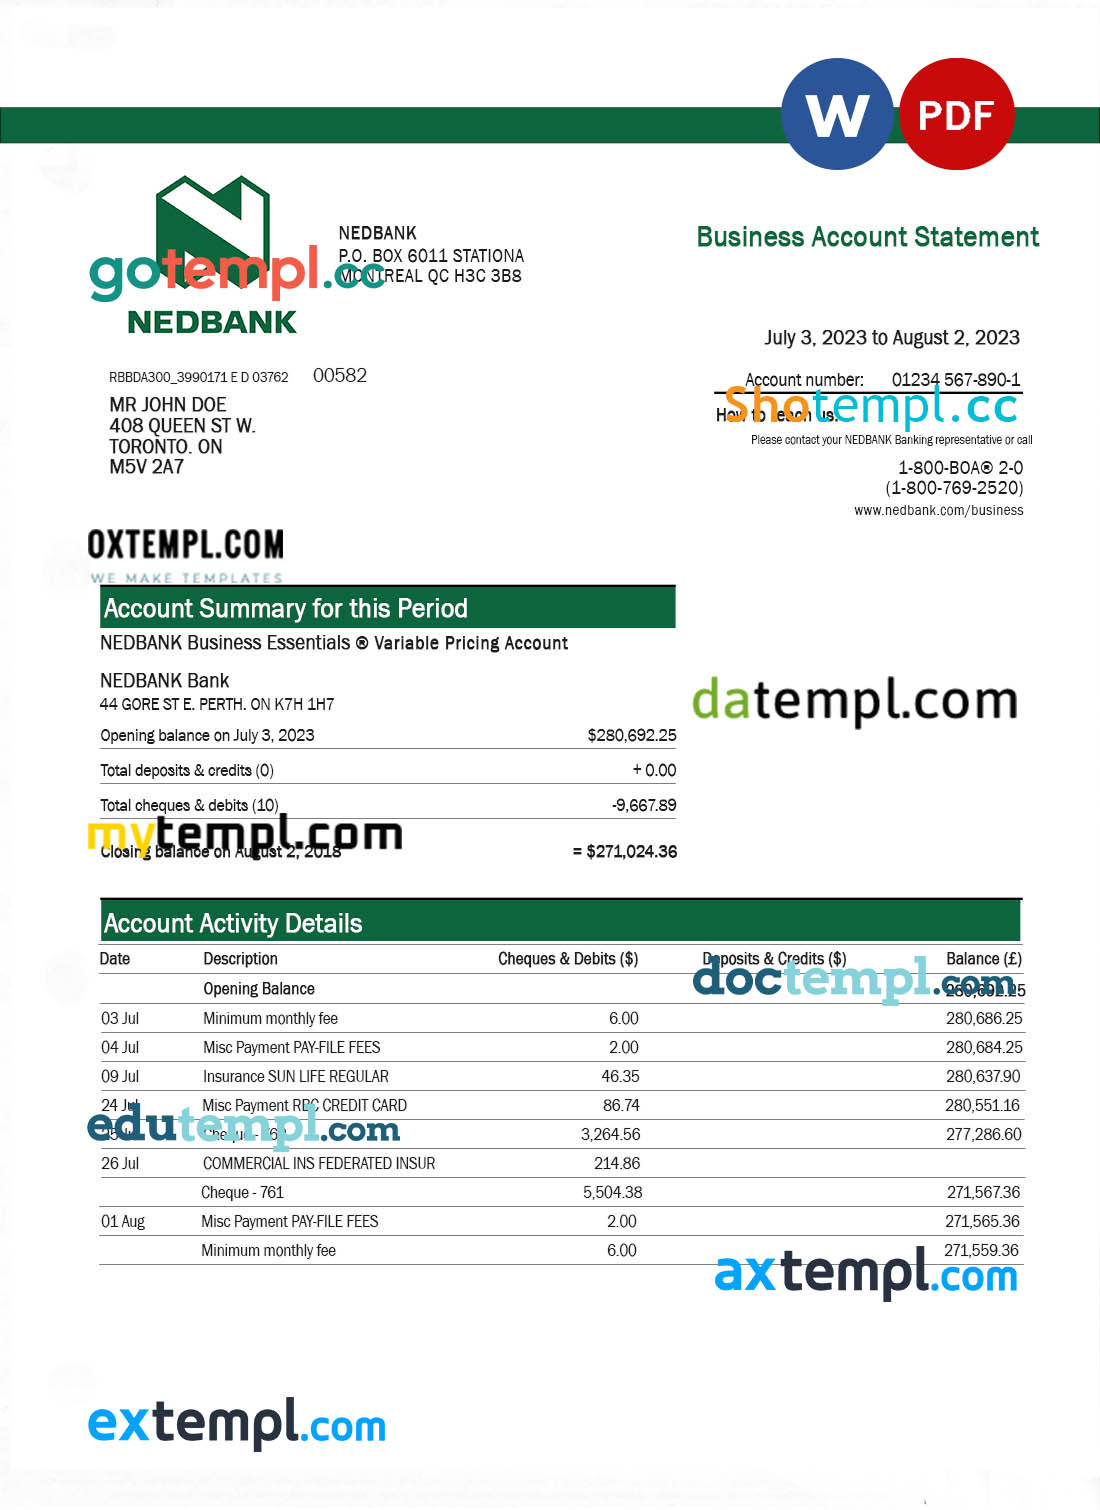 Bank Muscat enterprise account statement Word and PDF template